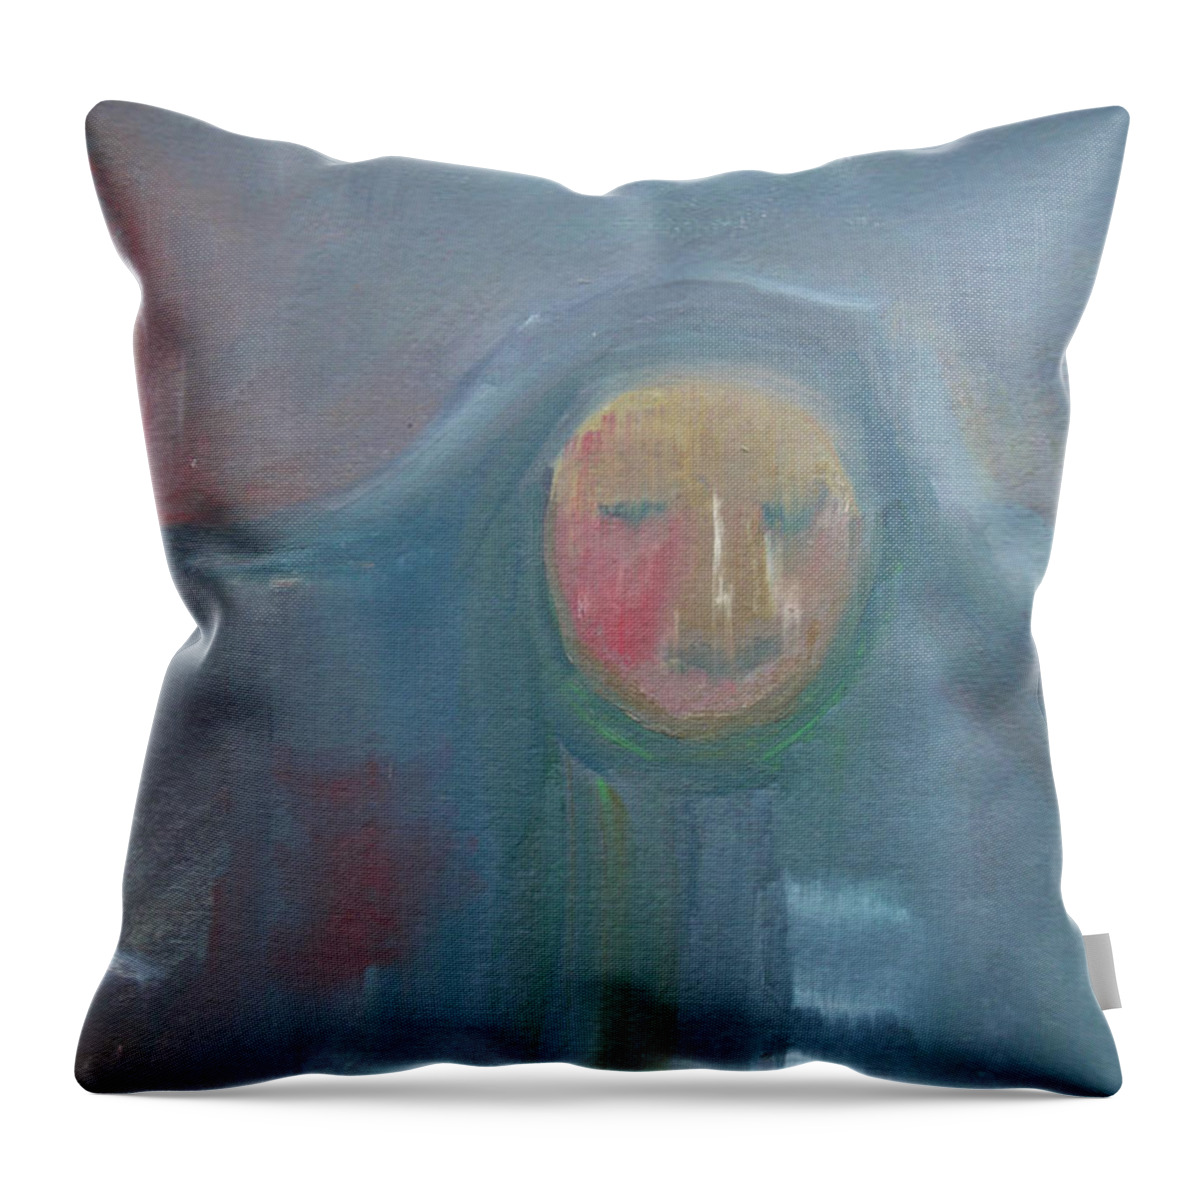 Mourning Throw Pillow featuring the painting Endless Sorrow by Susan Esbensen